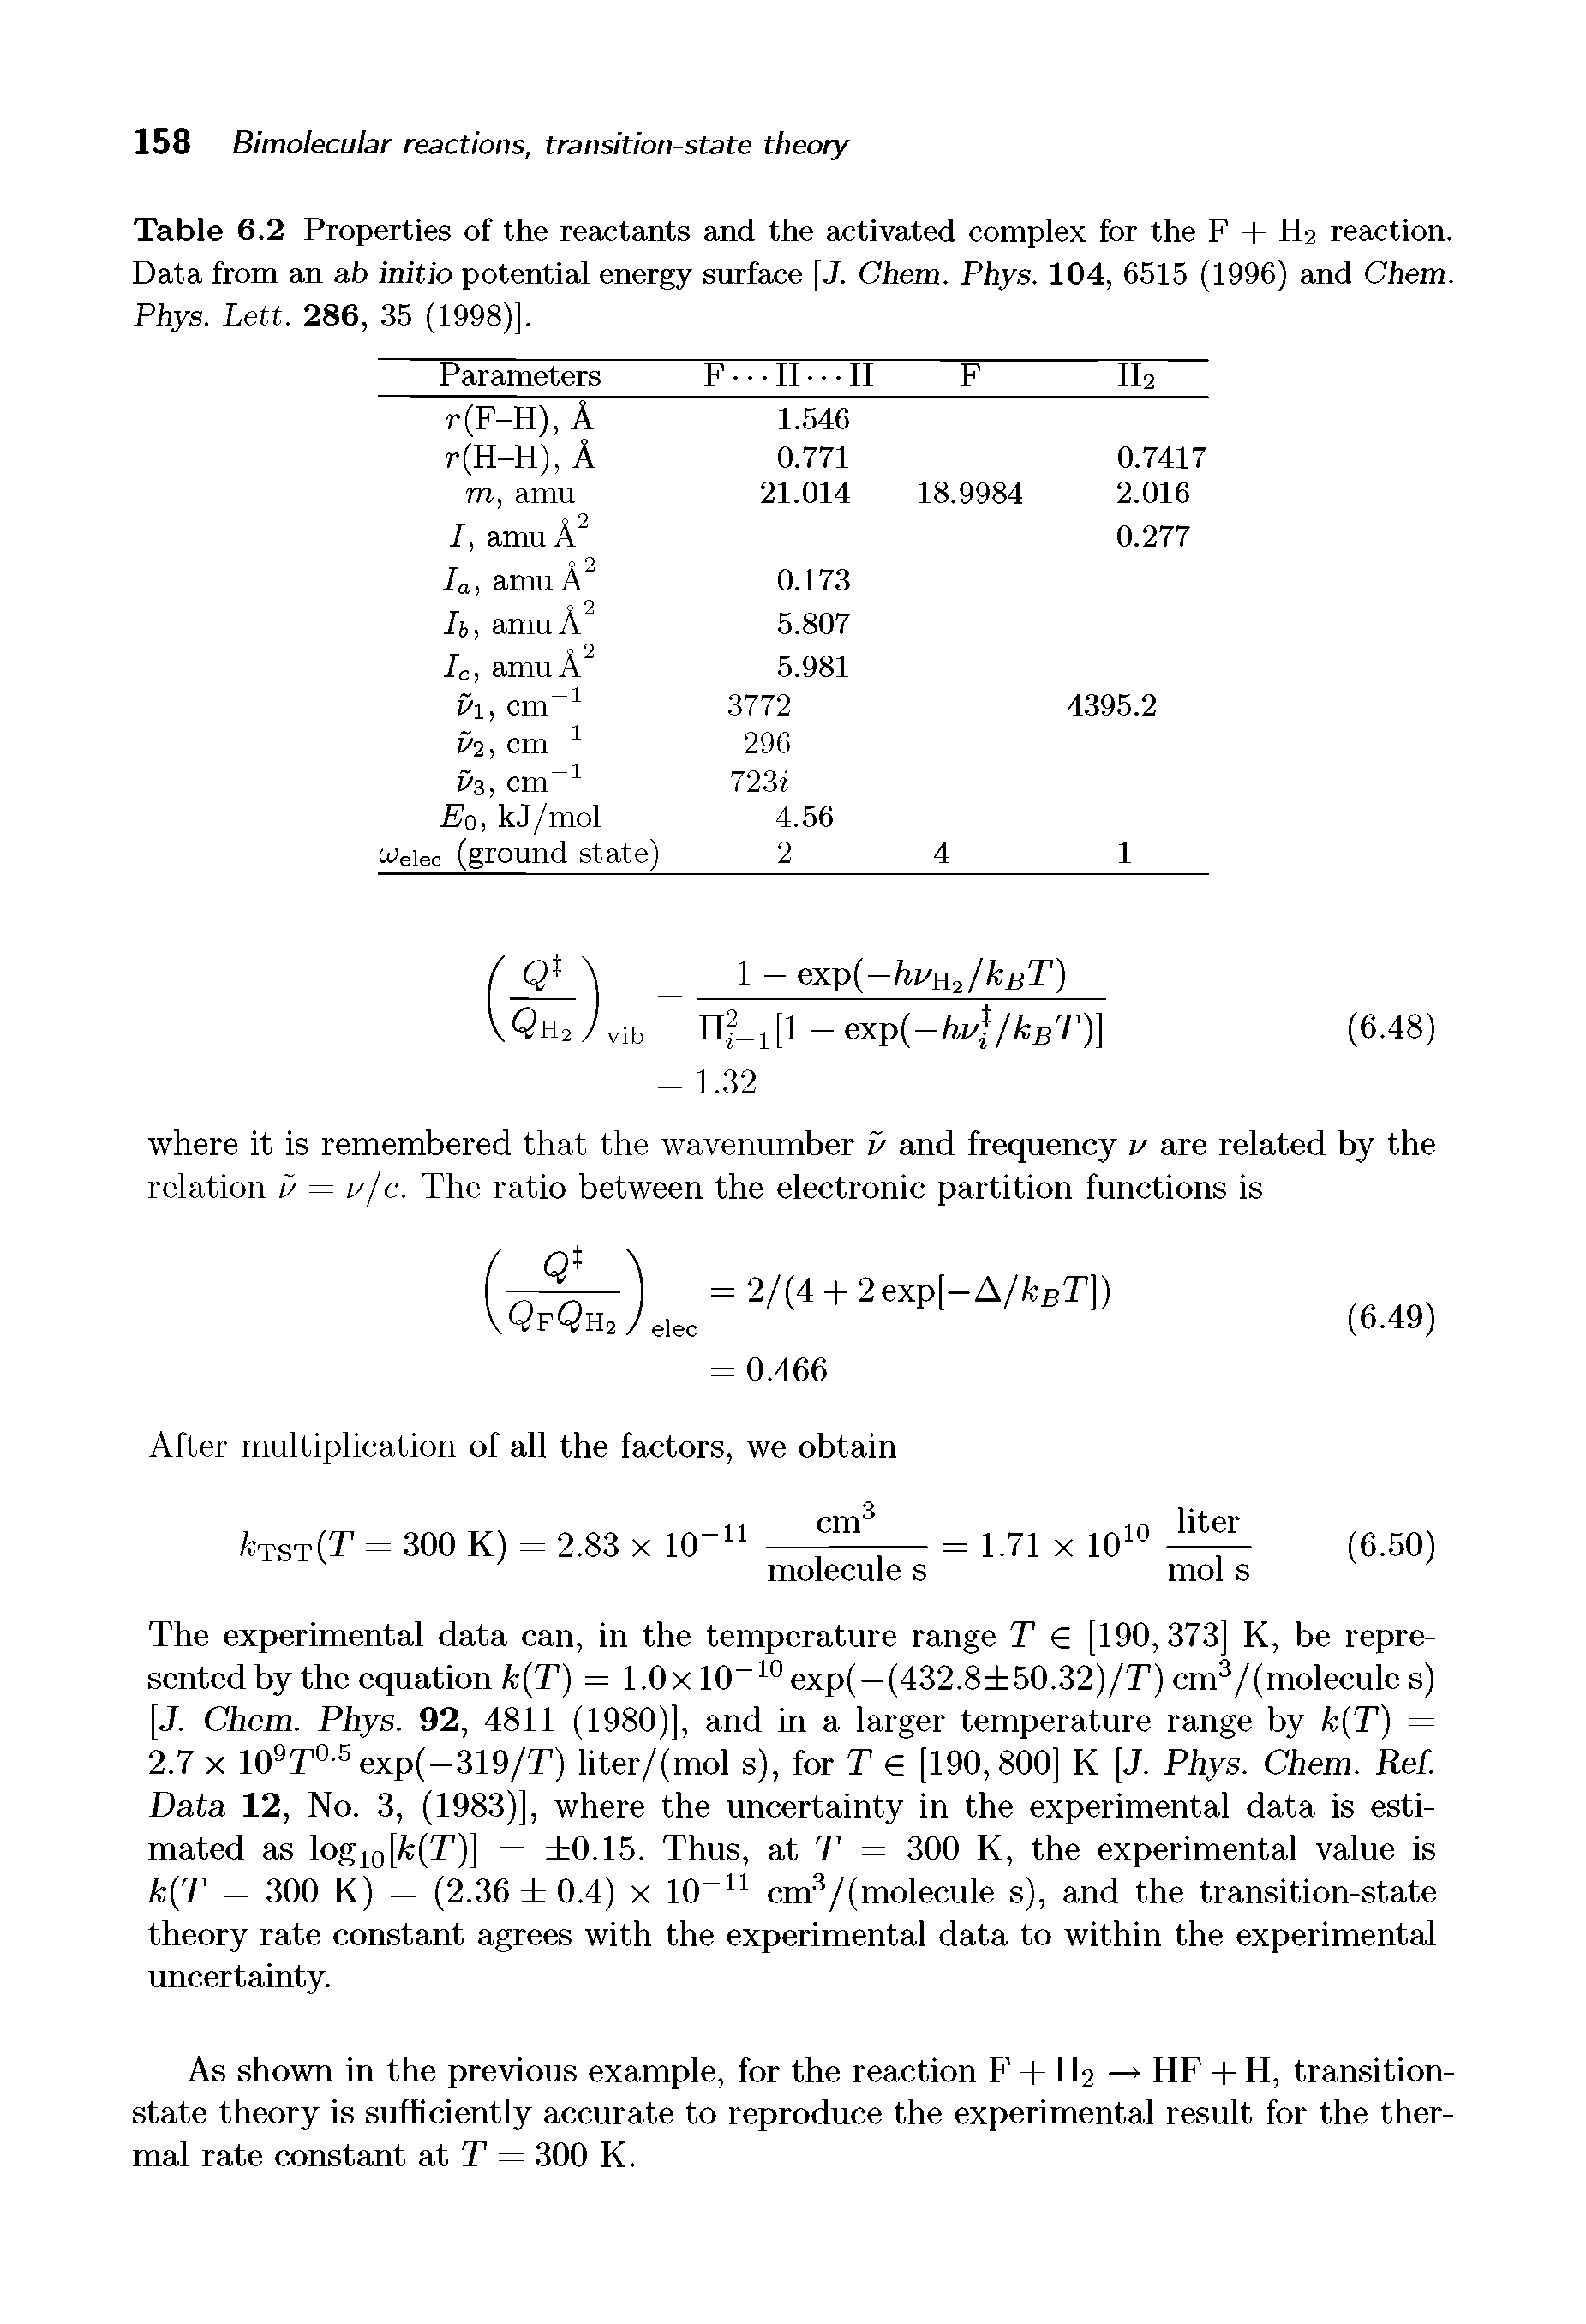 Table 6.2 Properties of the reactants and the activated complex for the F + H2 reaction. Data from an ab initio potential energy surface [J. Ghem. Phys. 104, 6515 (1996) and Chem. Phys. Lett. 286, 35 (1998)].